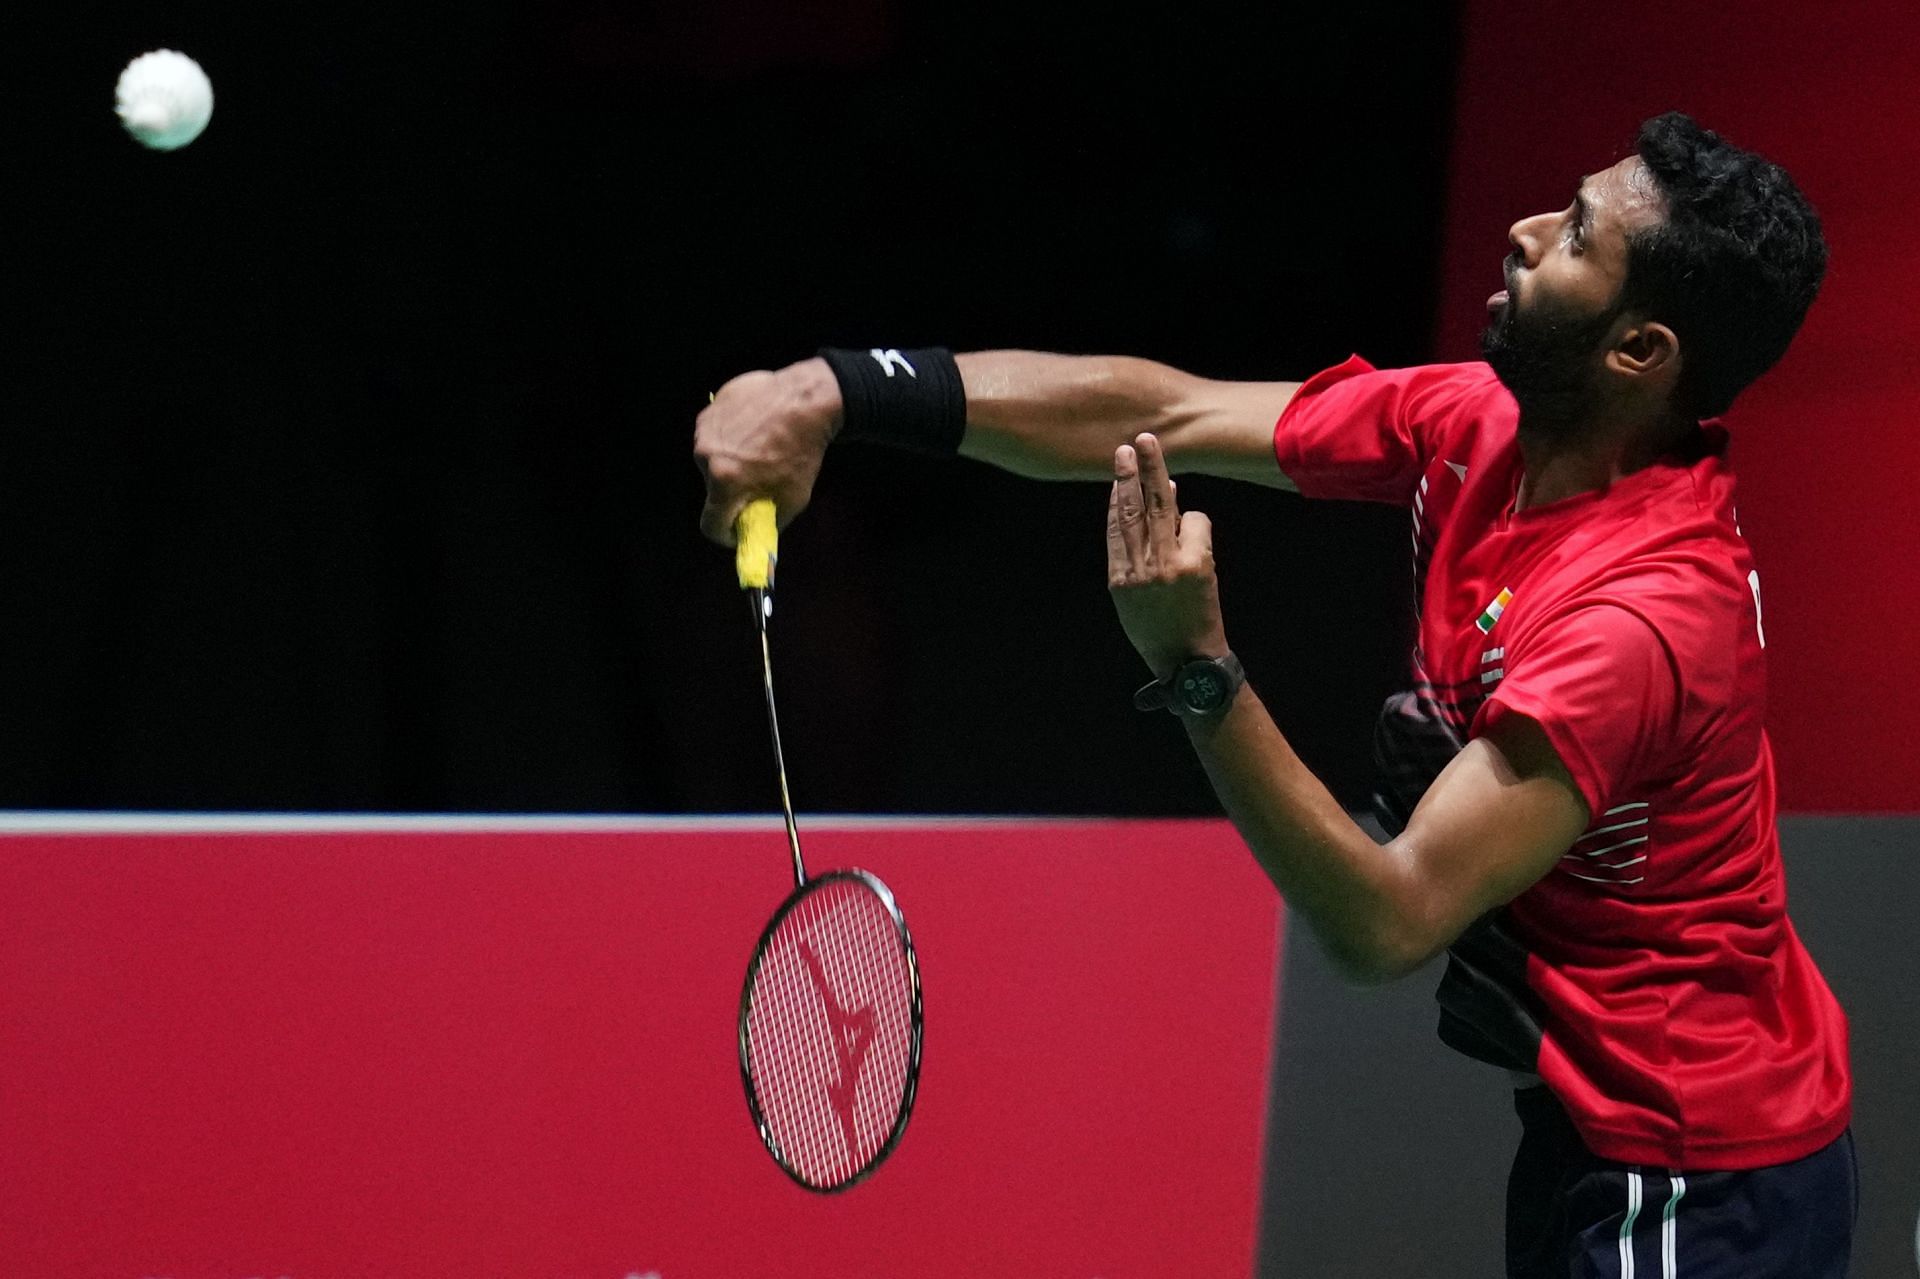 HS Prannoy moved up to the 8th position in the latest BWF rankings.